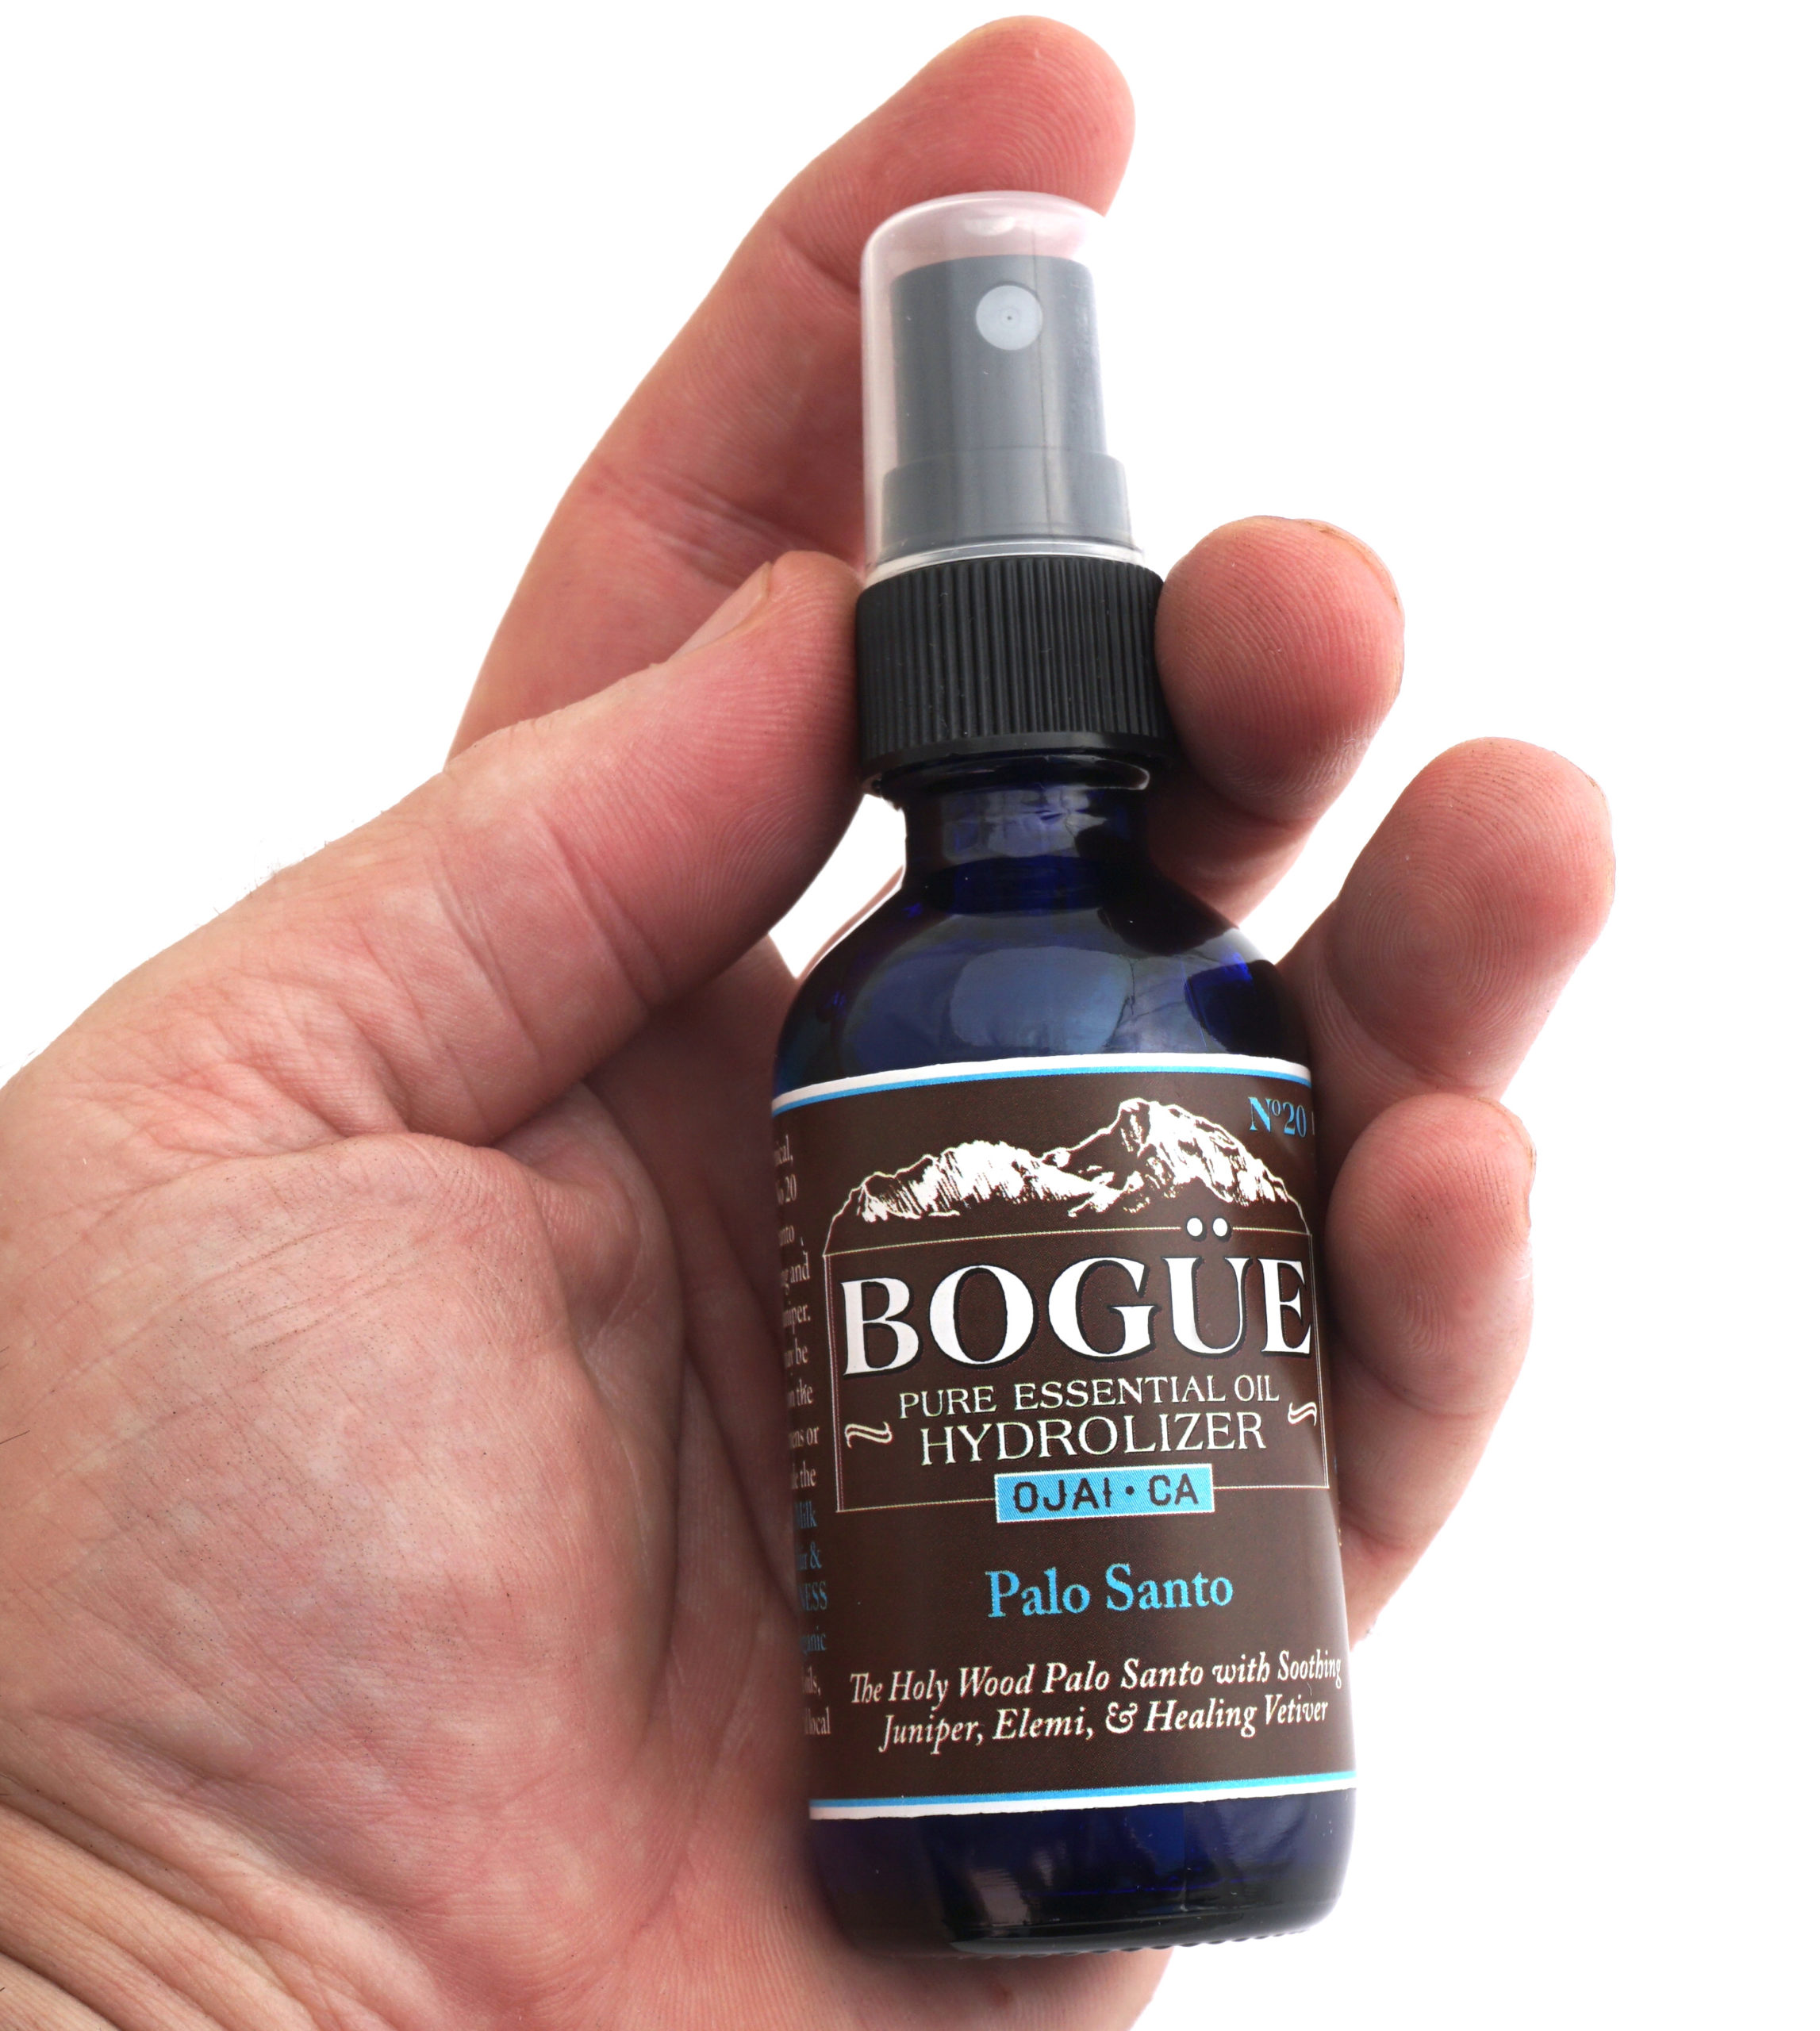 Pure Essential Oil Hydrolizer Spray BOGUE No.20 Palo Santo Blend- Holy  Wood Palo Santo with Soothing Juniper, Elemi, & Healing Vetiver